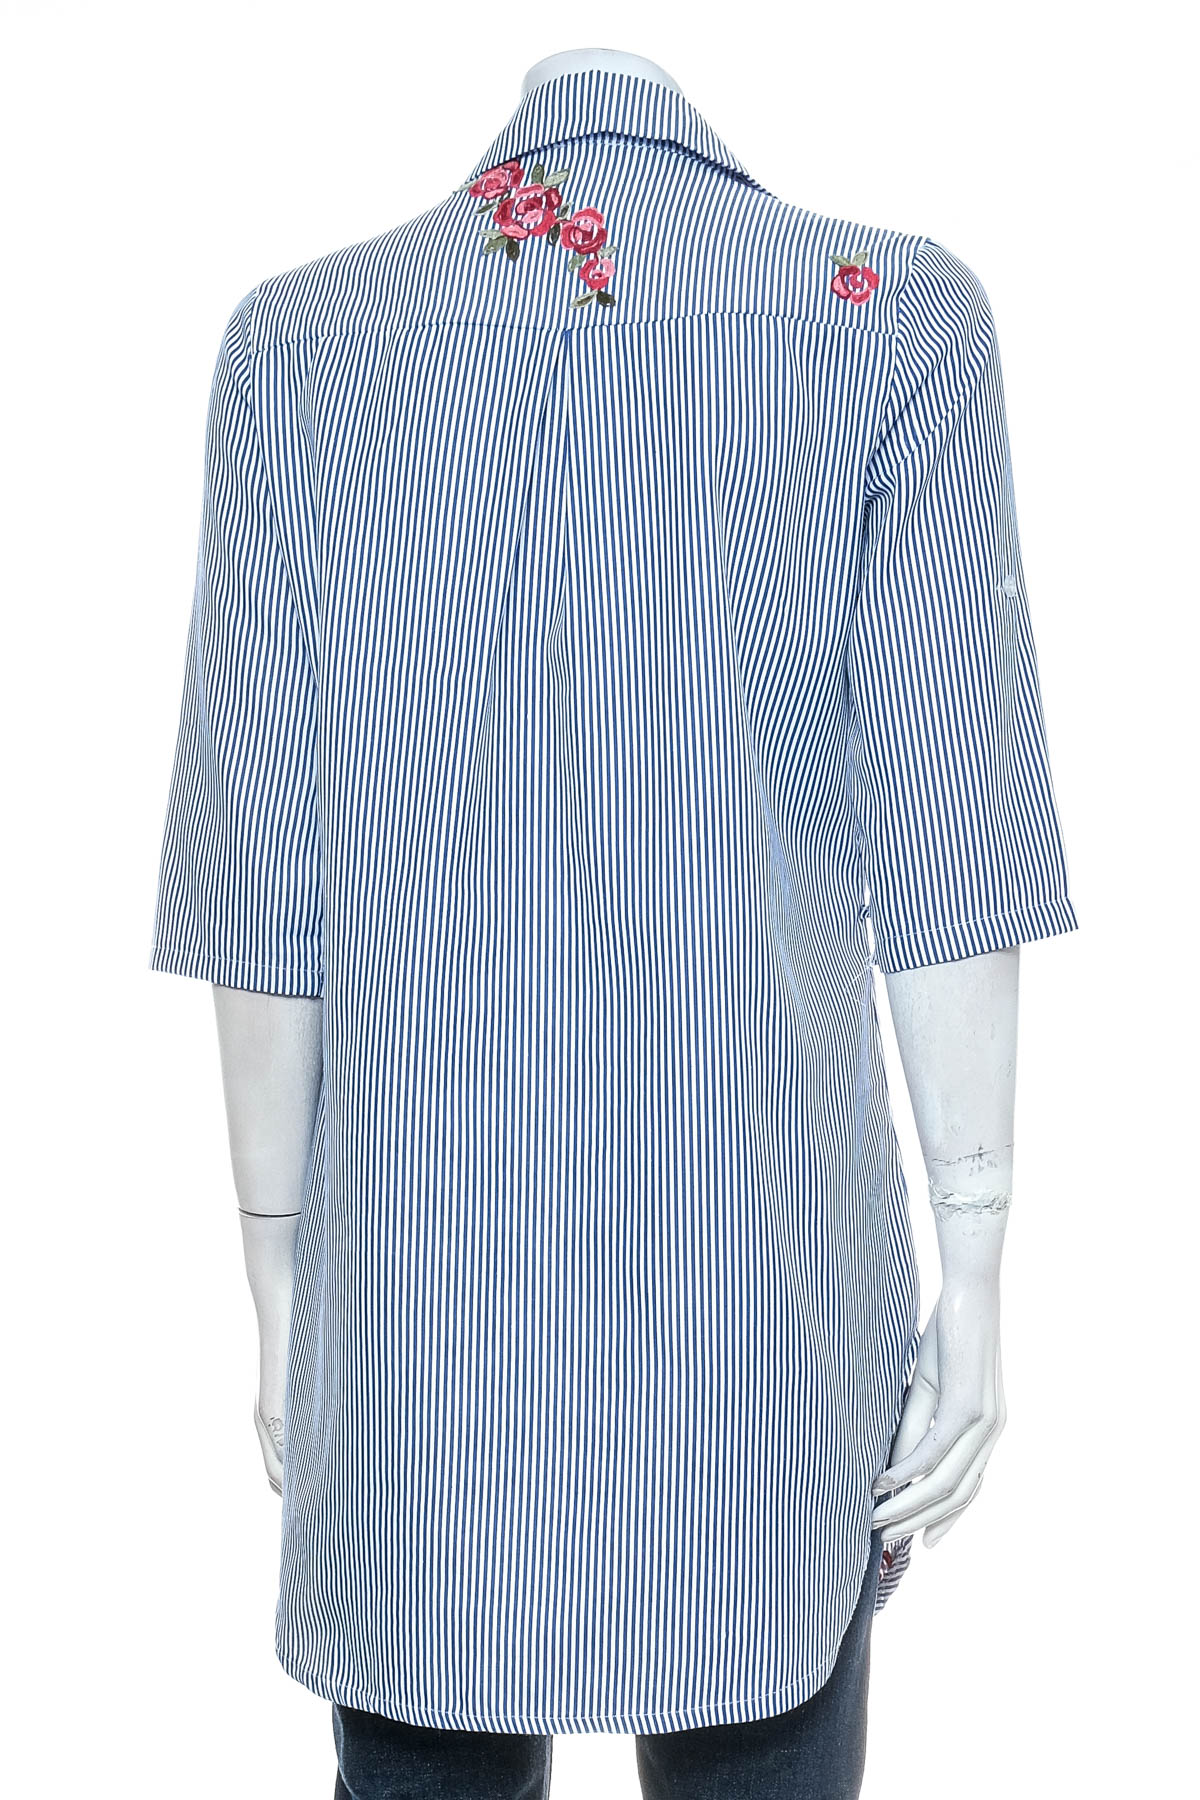 Women's shirt - Made in Italy - 1